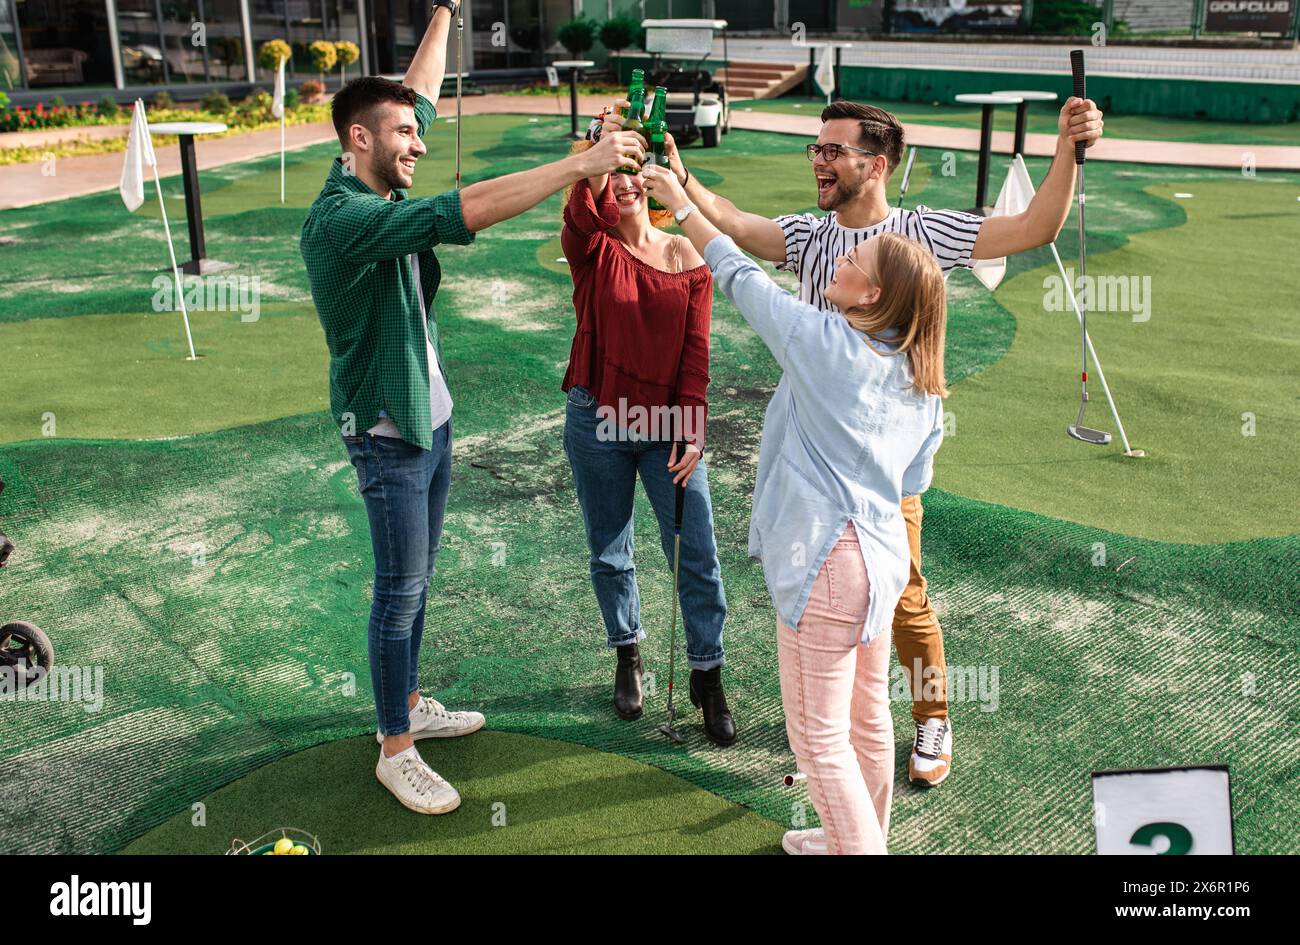 Group of smiling friends enjoying together playing mini golf in the city. Stock Photo